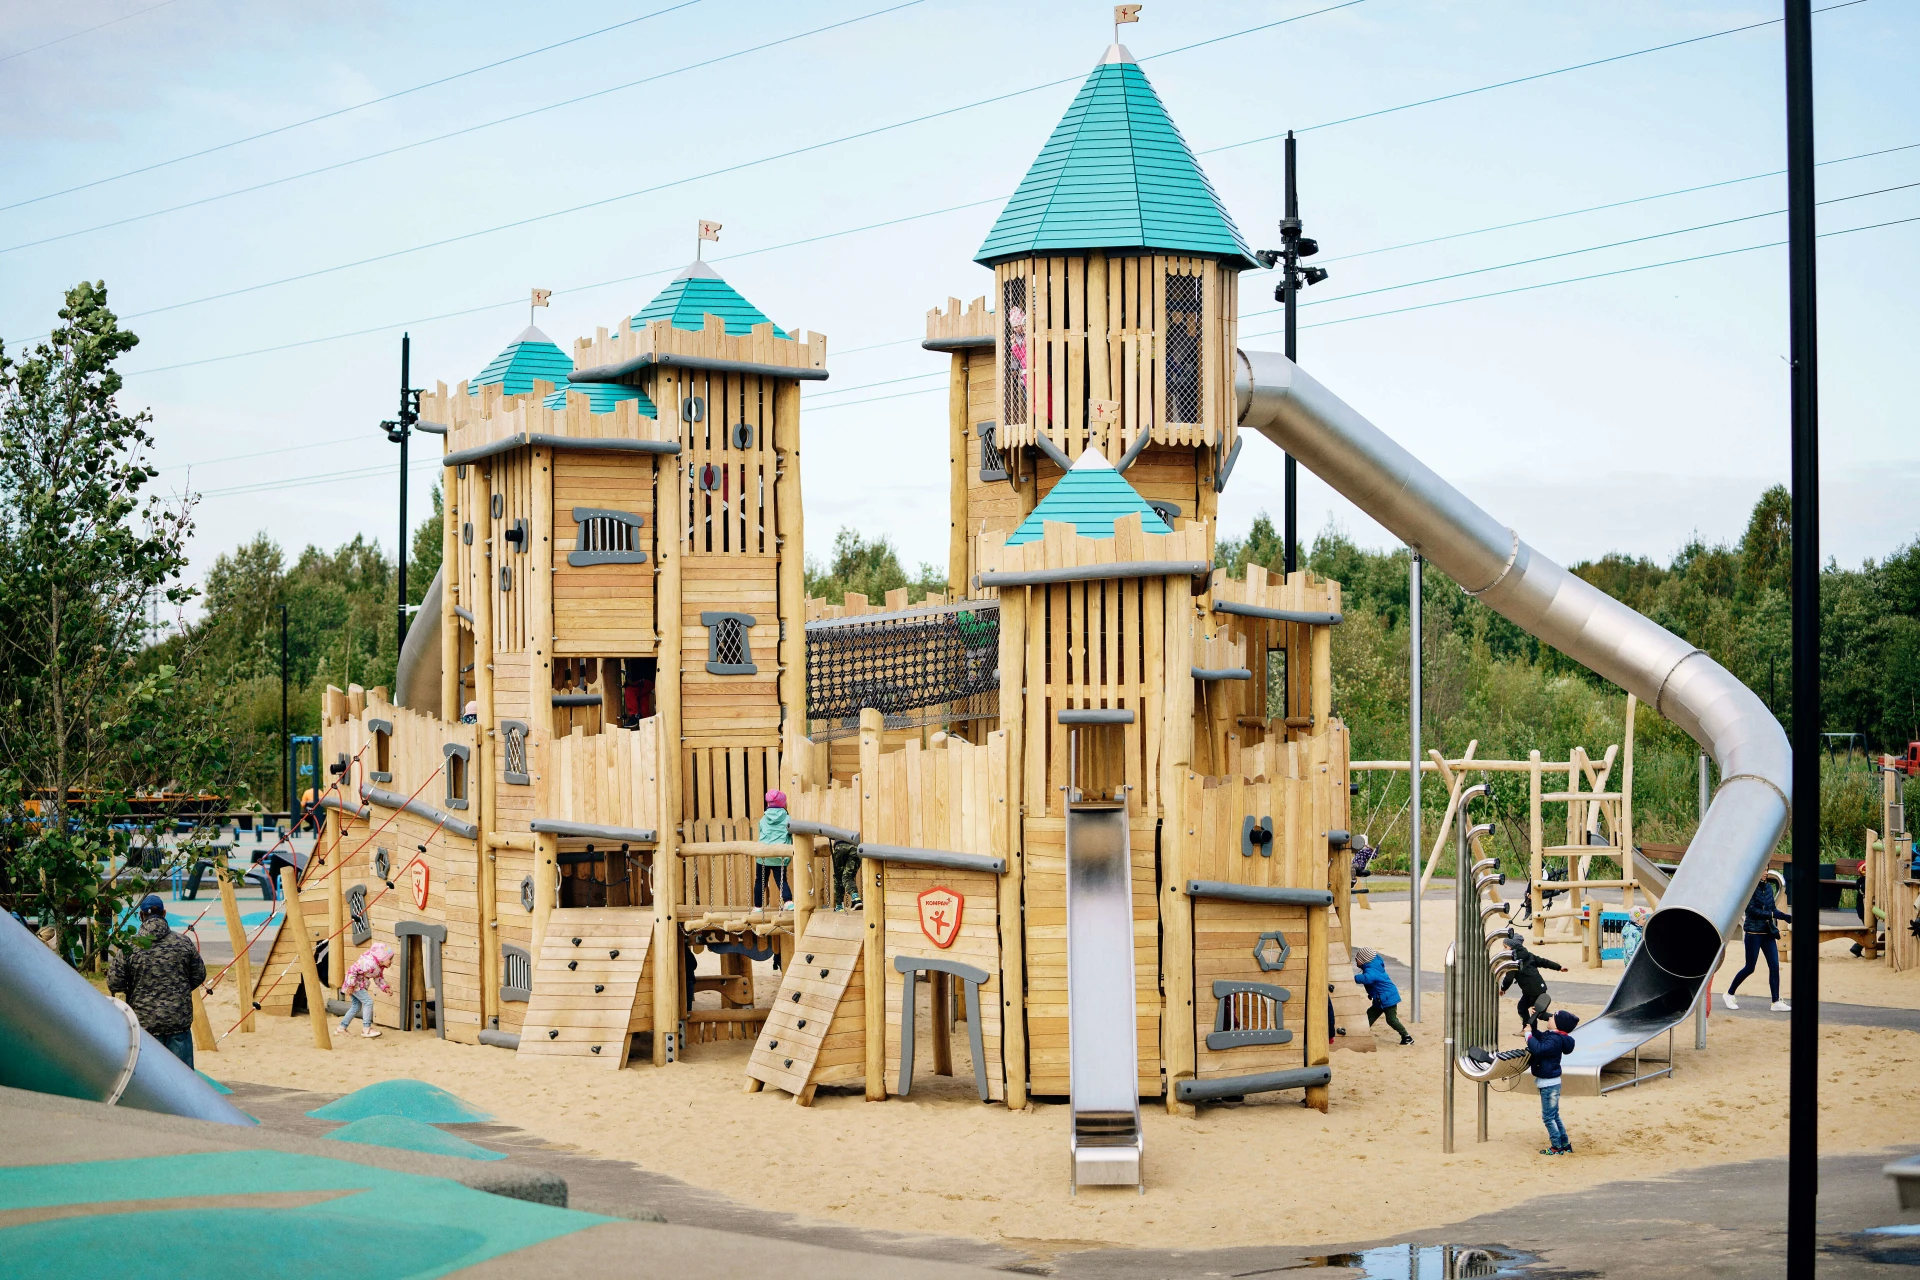 Large commercial wooden playground castle installed in Tallinn, Estonia